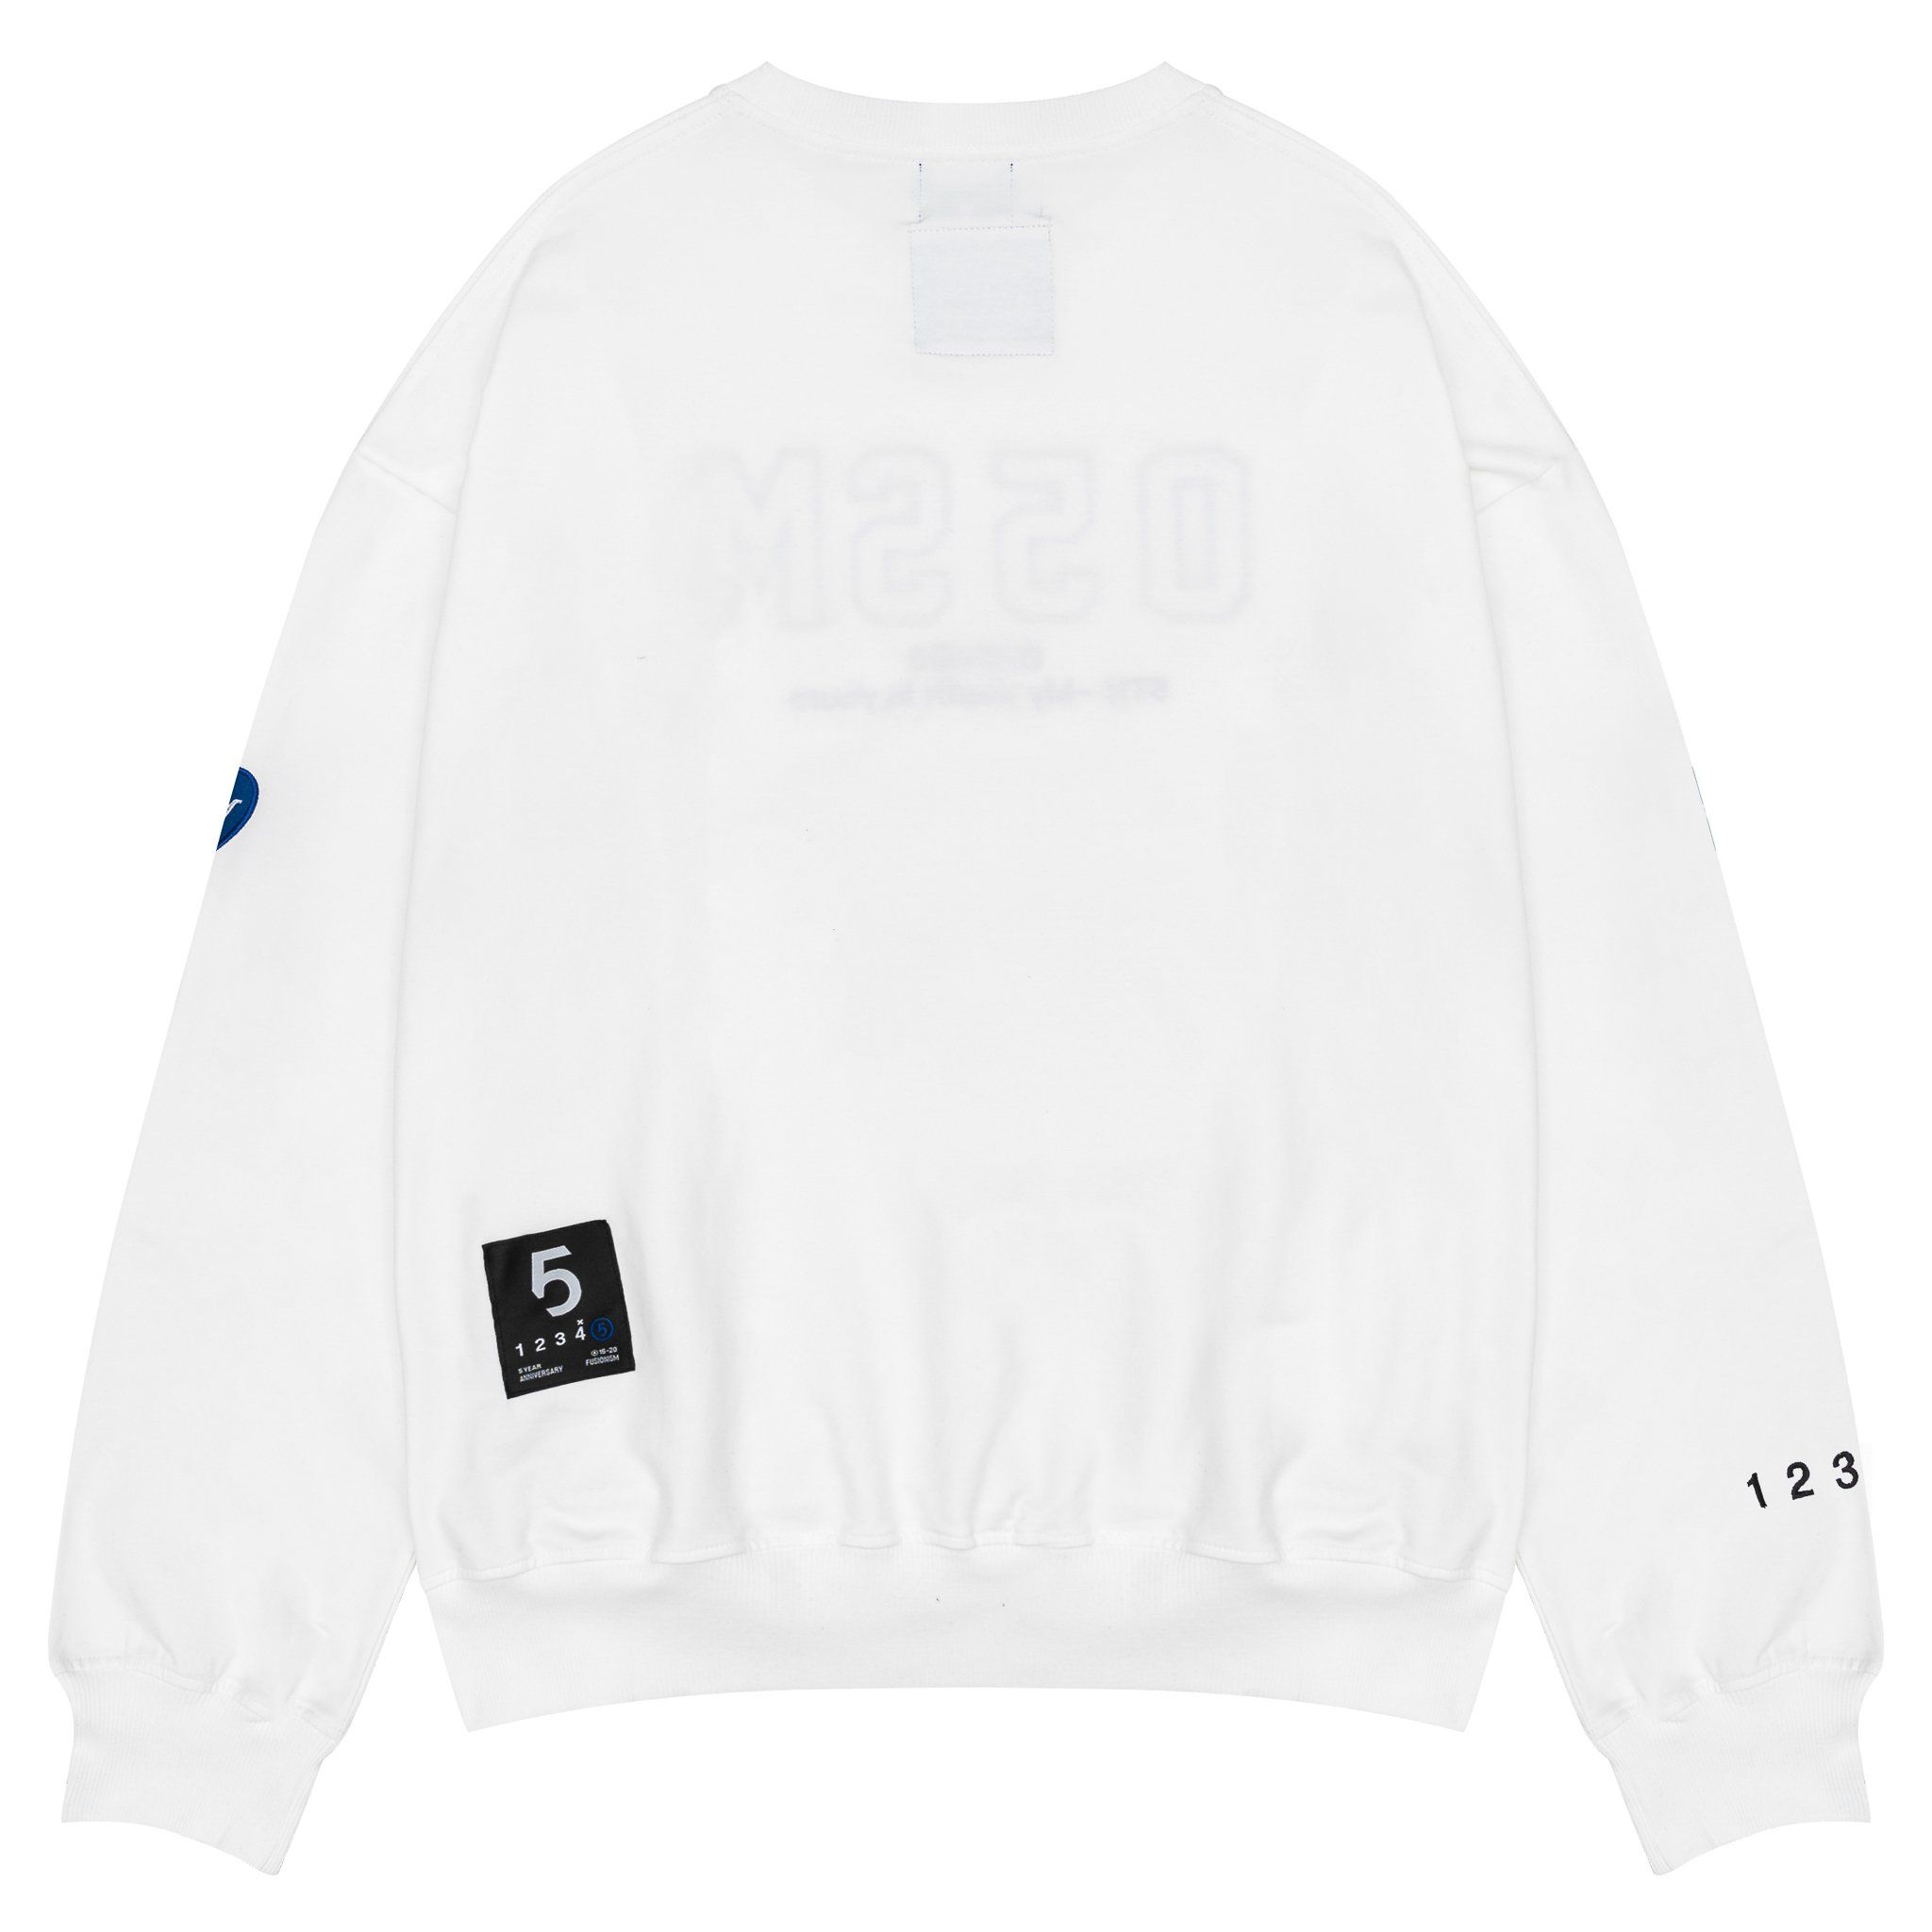 Sweater 05SM | Trắng